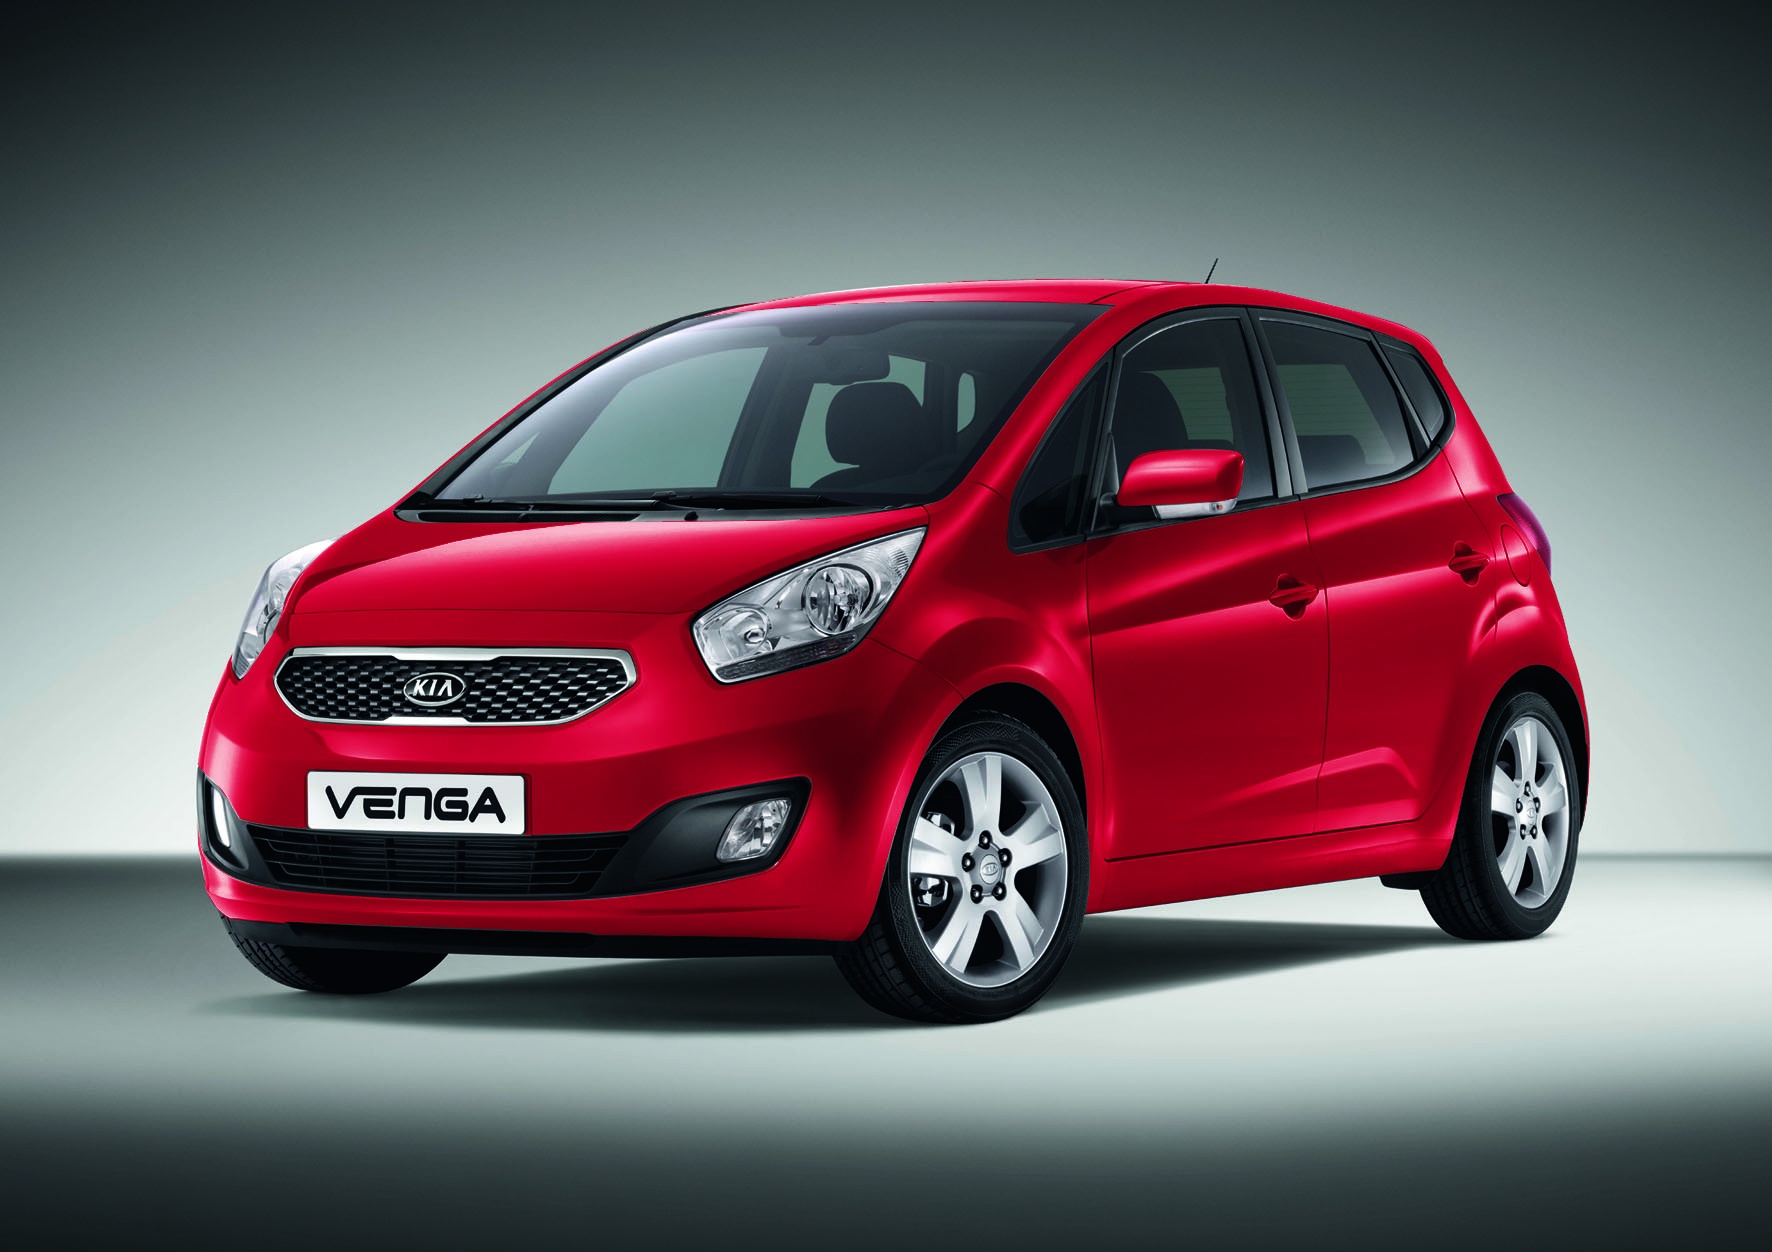 Kia Venga 2014 Review, Amazing Pictures and Images Look